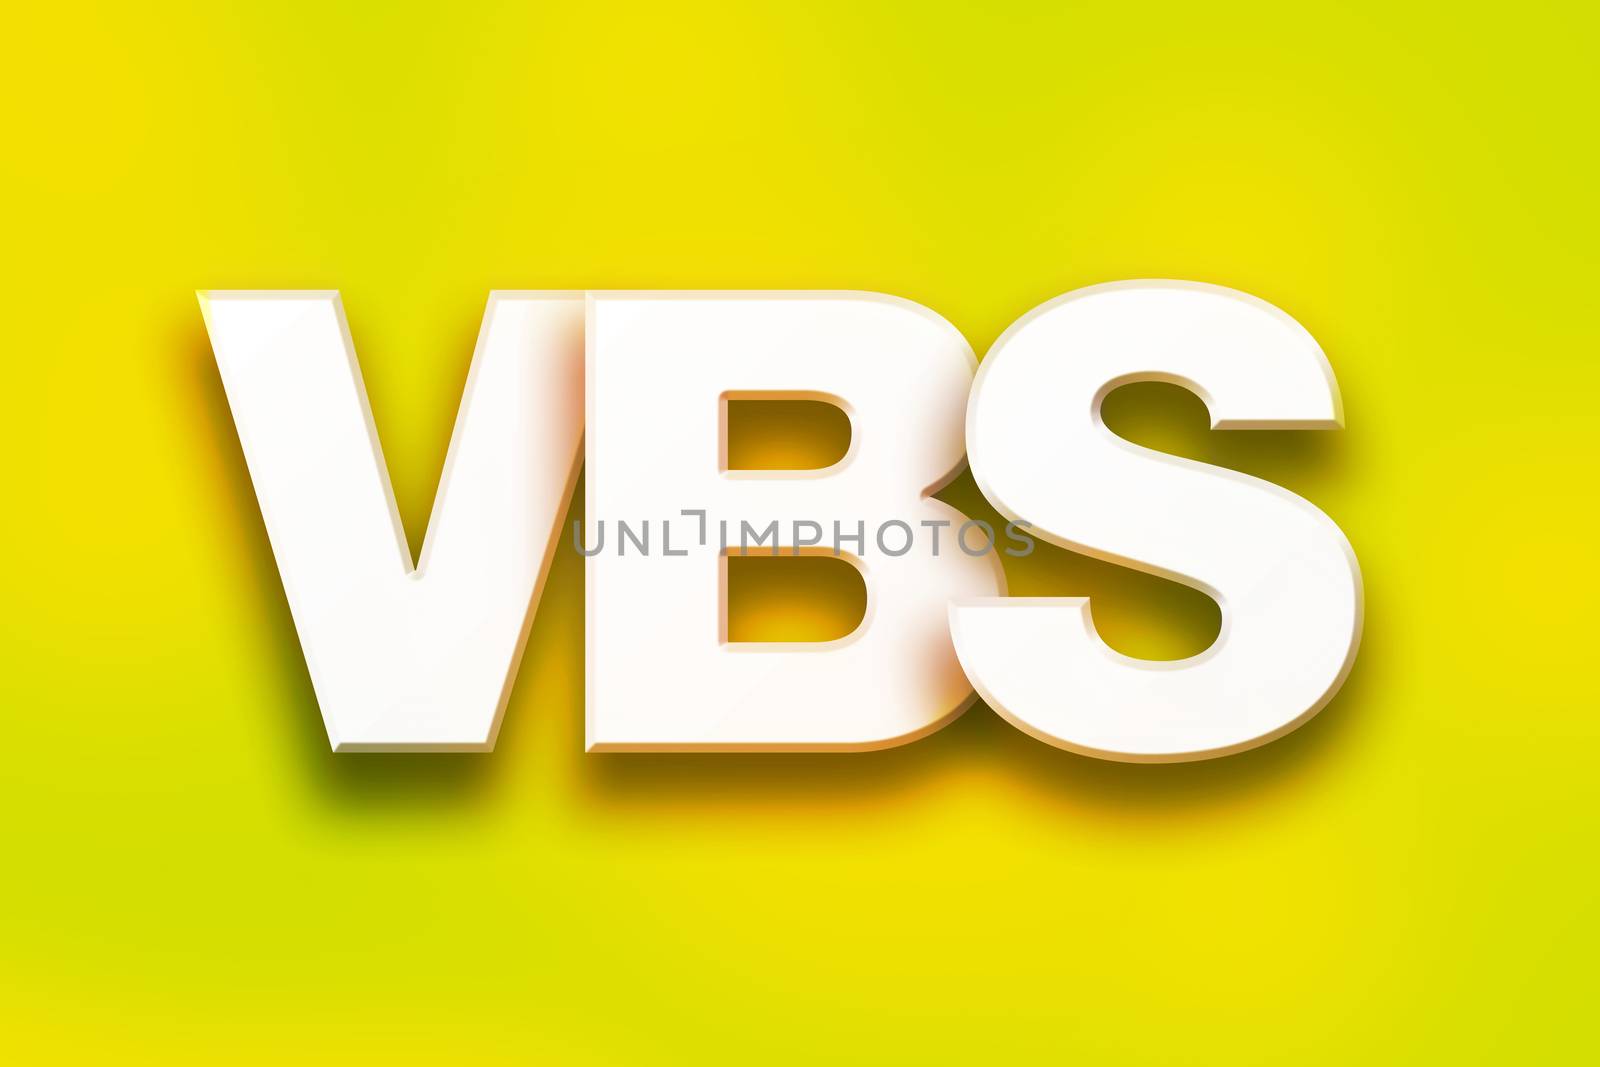 The word "VBS" written in white 3D letters on a colorful background concept and theme.